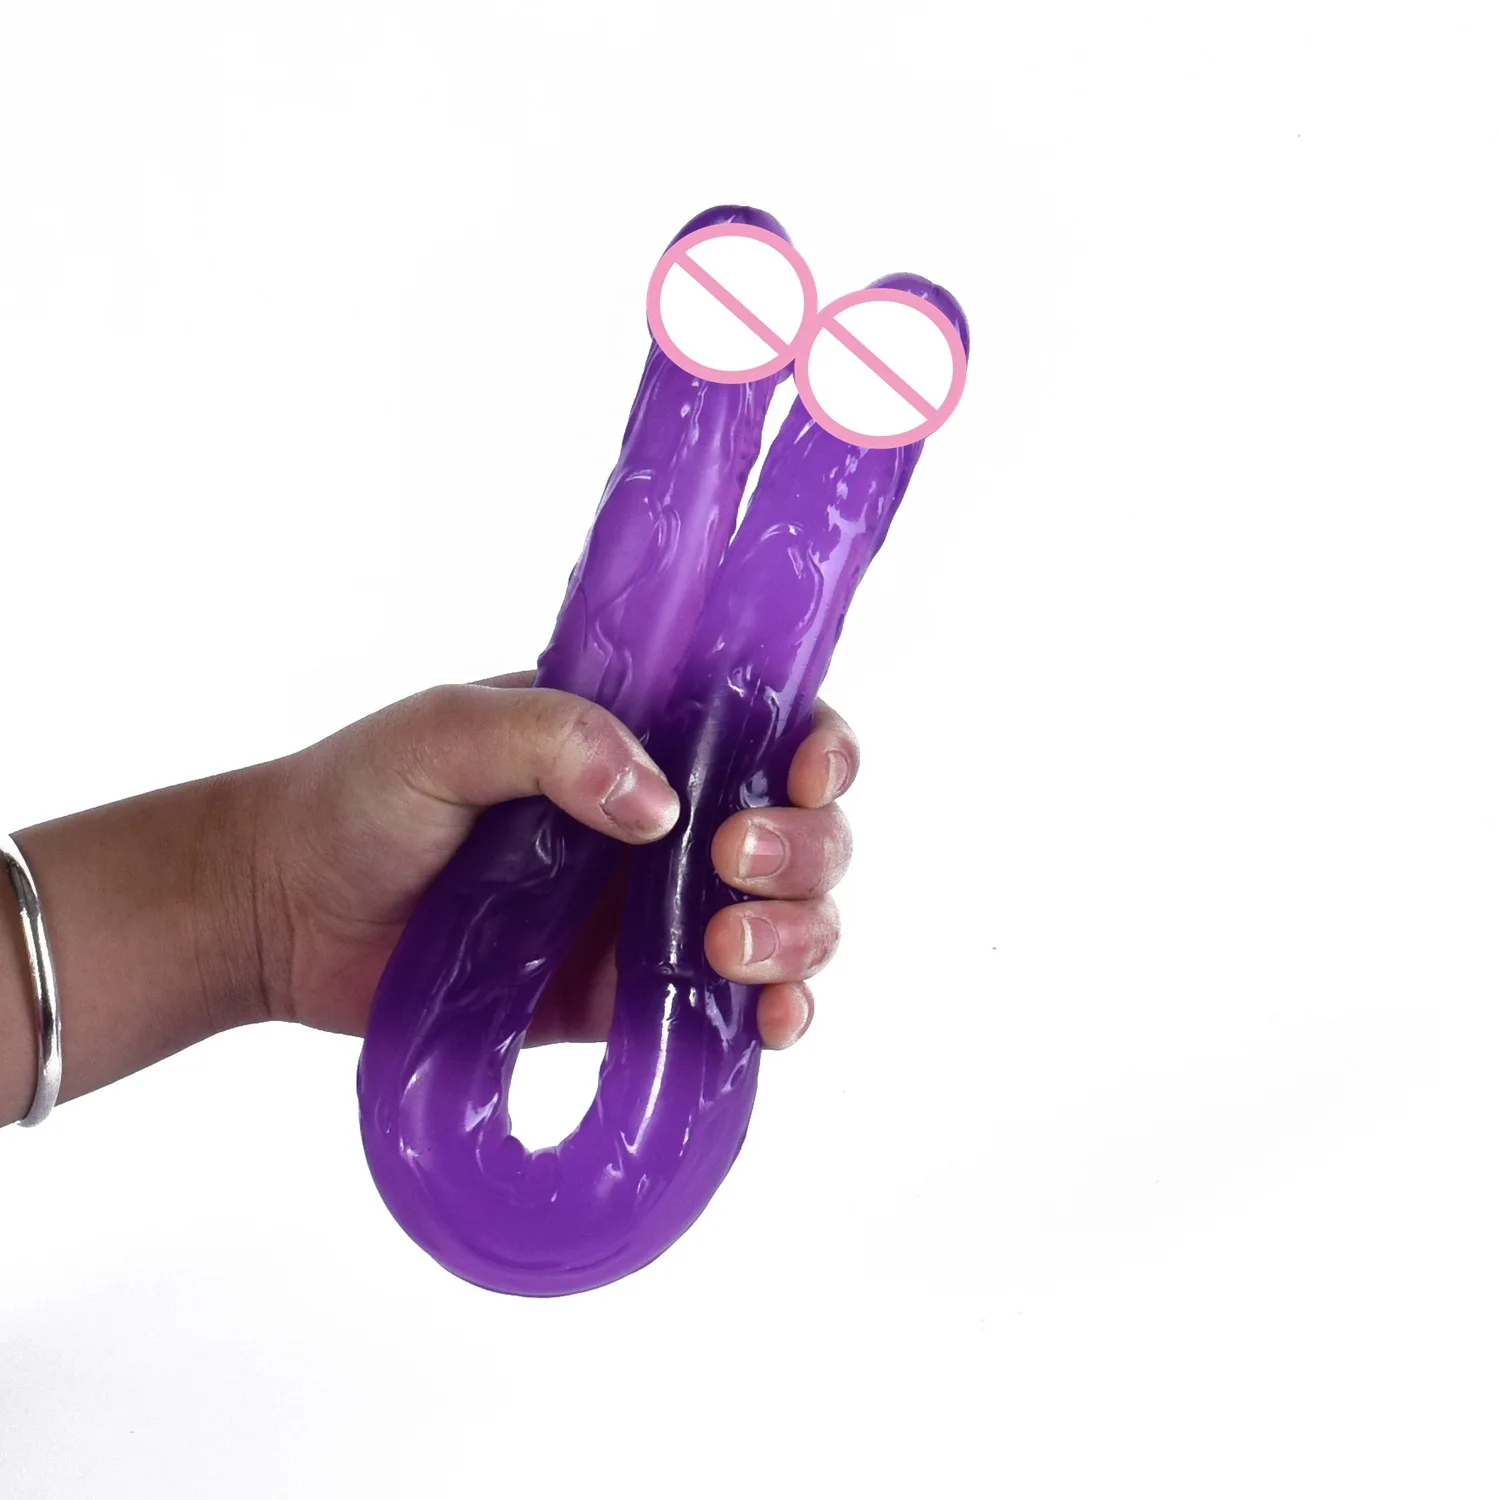 China Factory Wholesale Double head Dildo Long Jelly Realistic Dildo Double Ended Dildo Flexible Big Penis for Women Masturbator Sex Toys for Lesbian Wholesales H80f9de9f38364894ad255dcc18ce7ddaE